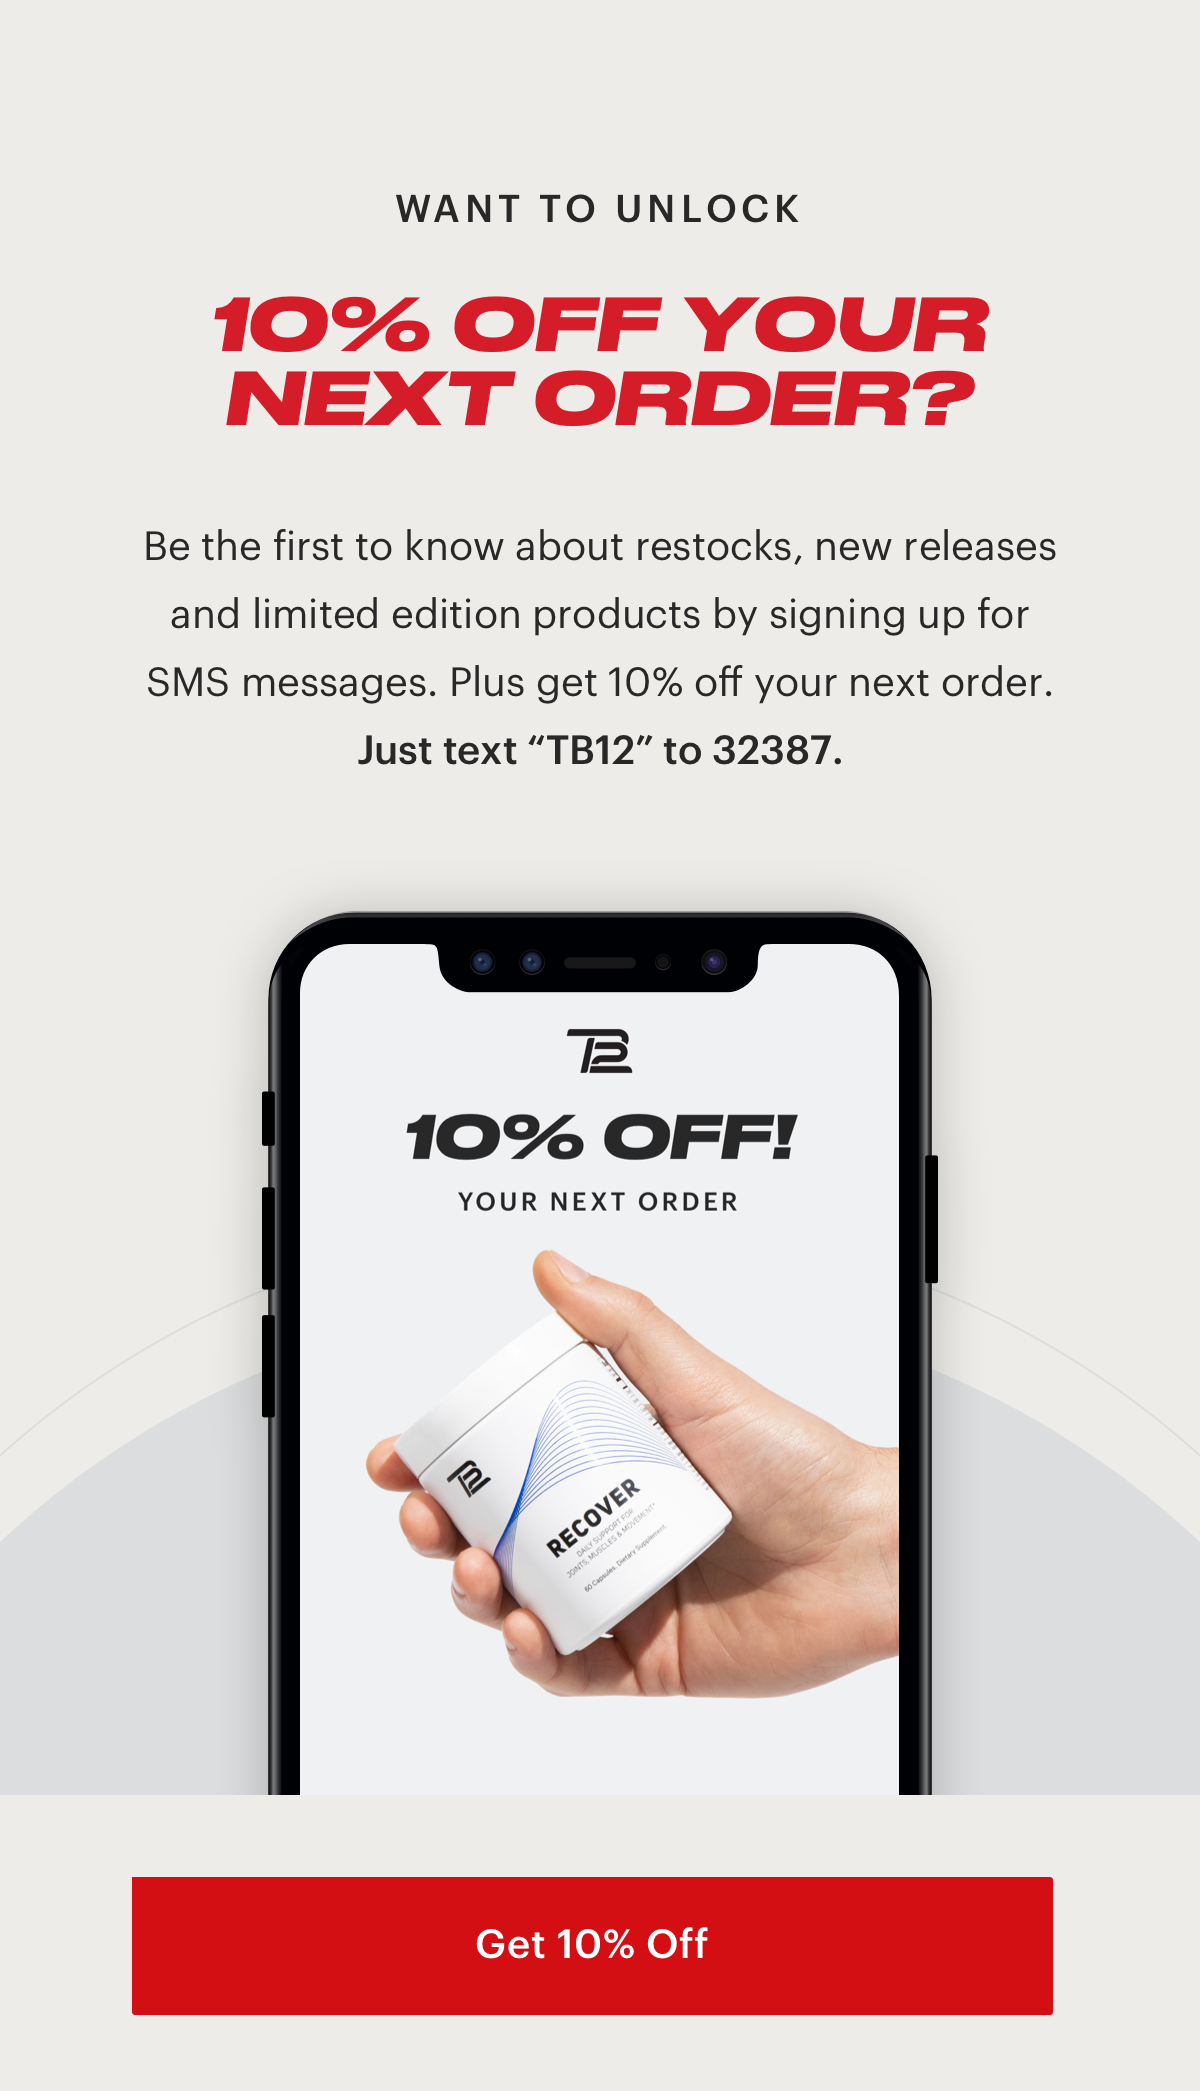 Sign Up For SMS - Get 10% Off